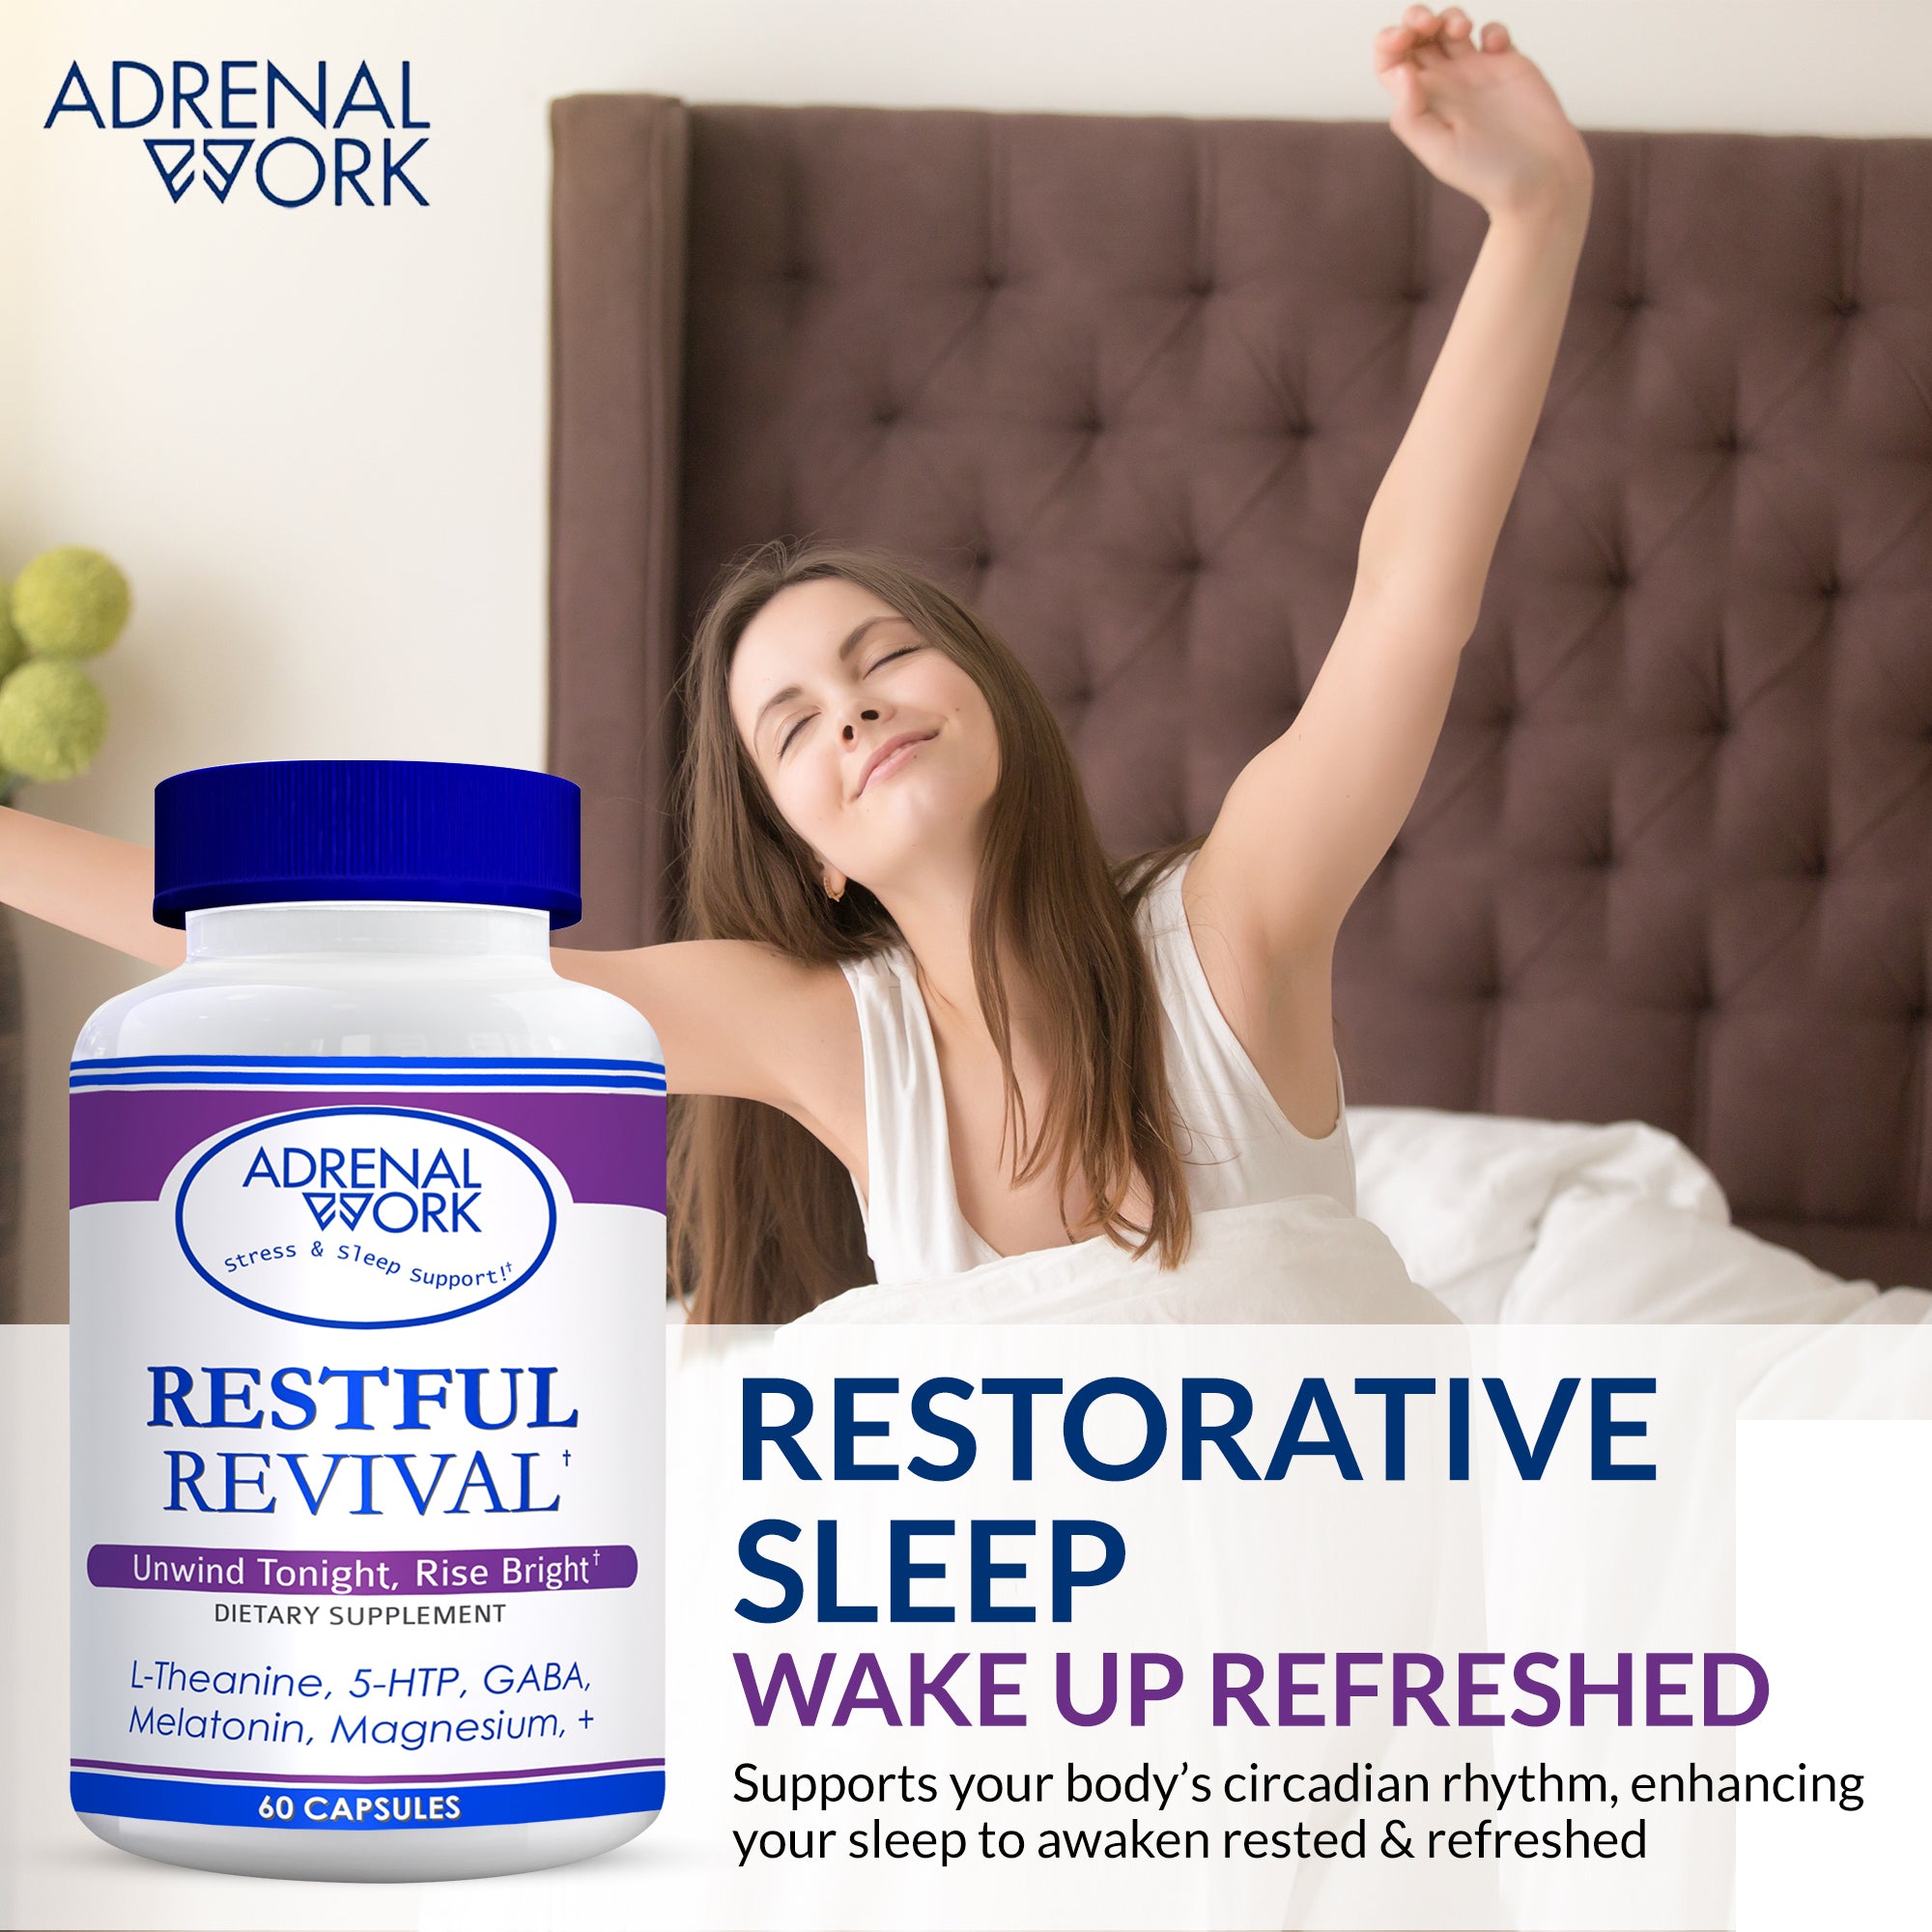 Restful Revival - Premium Stress and Sleep Support